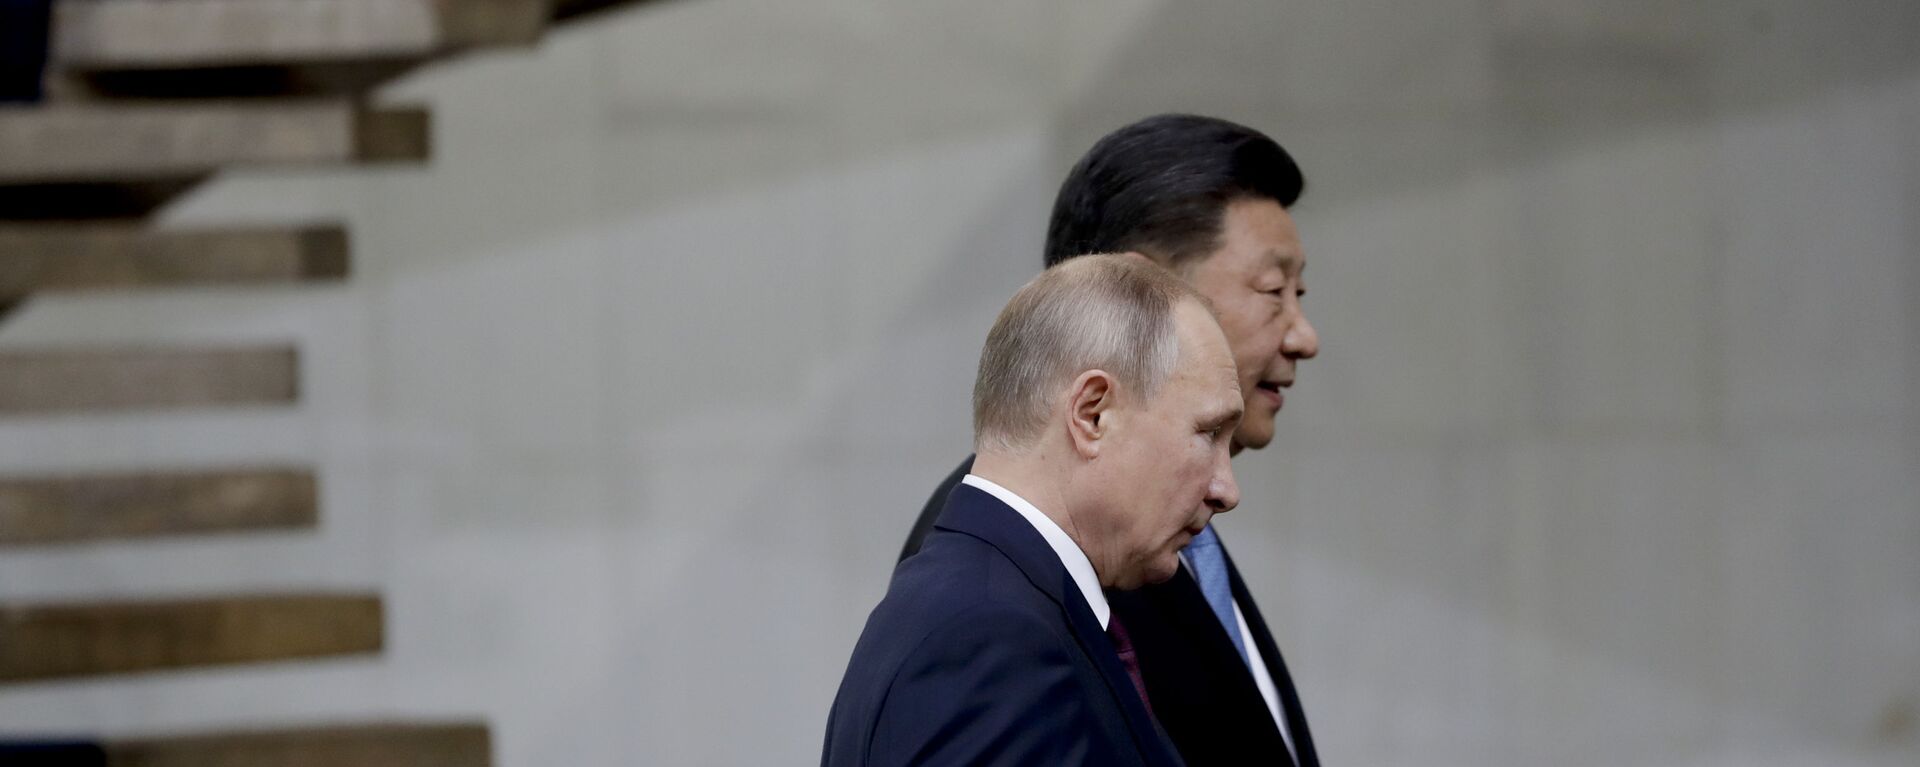 Russia's President Vladimir Putin and China's President Xi Jinping walk after the family photo of leaders of the BRICS emerging economies at the Itamaraty palace in Brasilia, Brazil, Thursday, Nov. 14, 2019 - Sputnik International, 1920, 28.06.2021